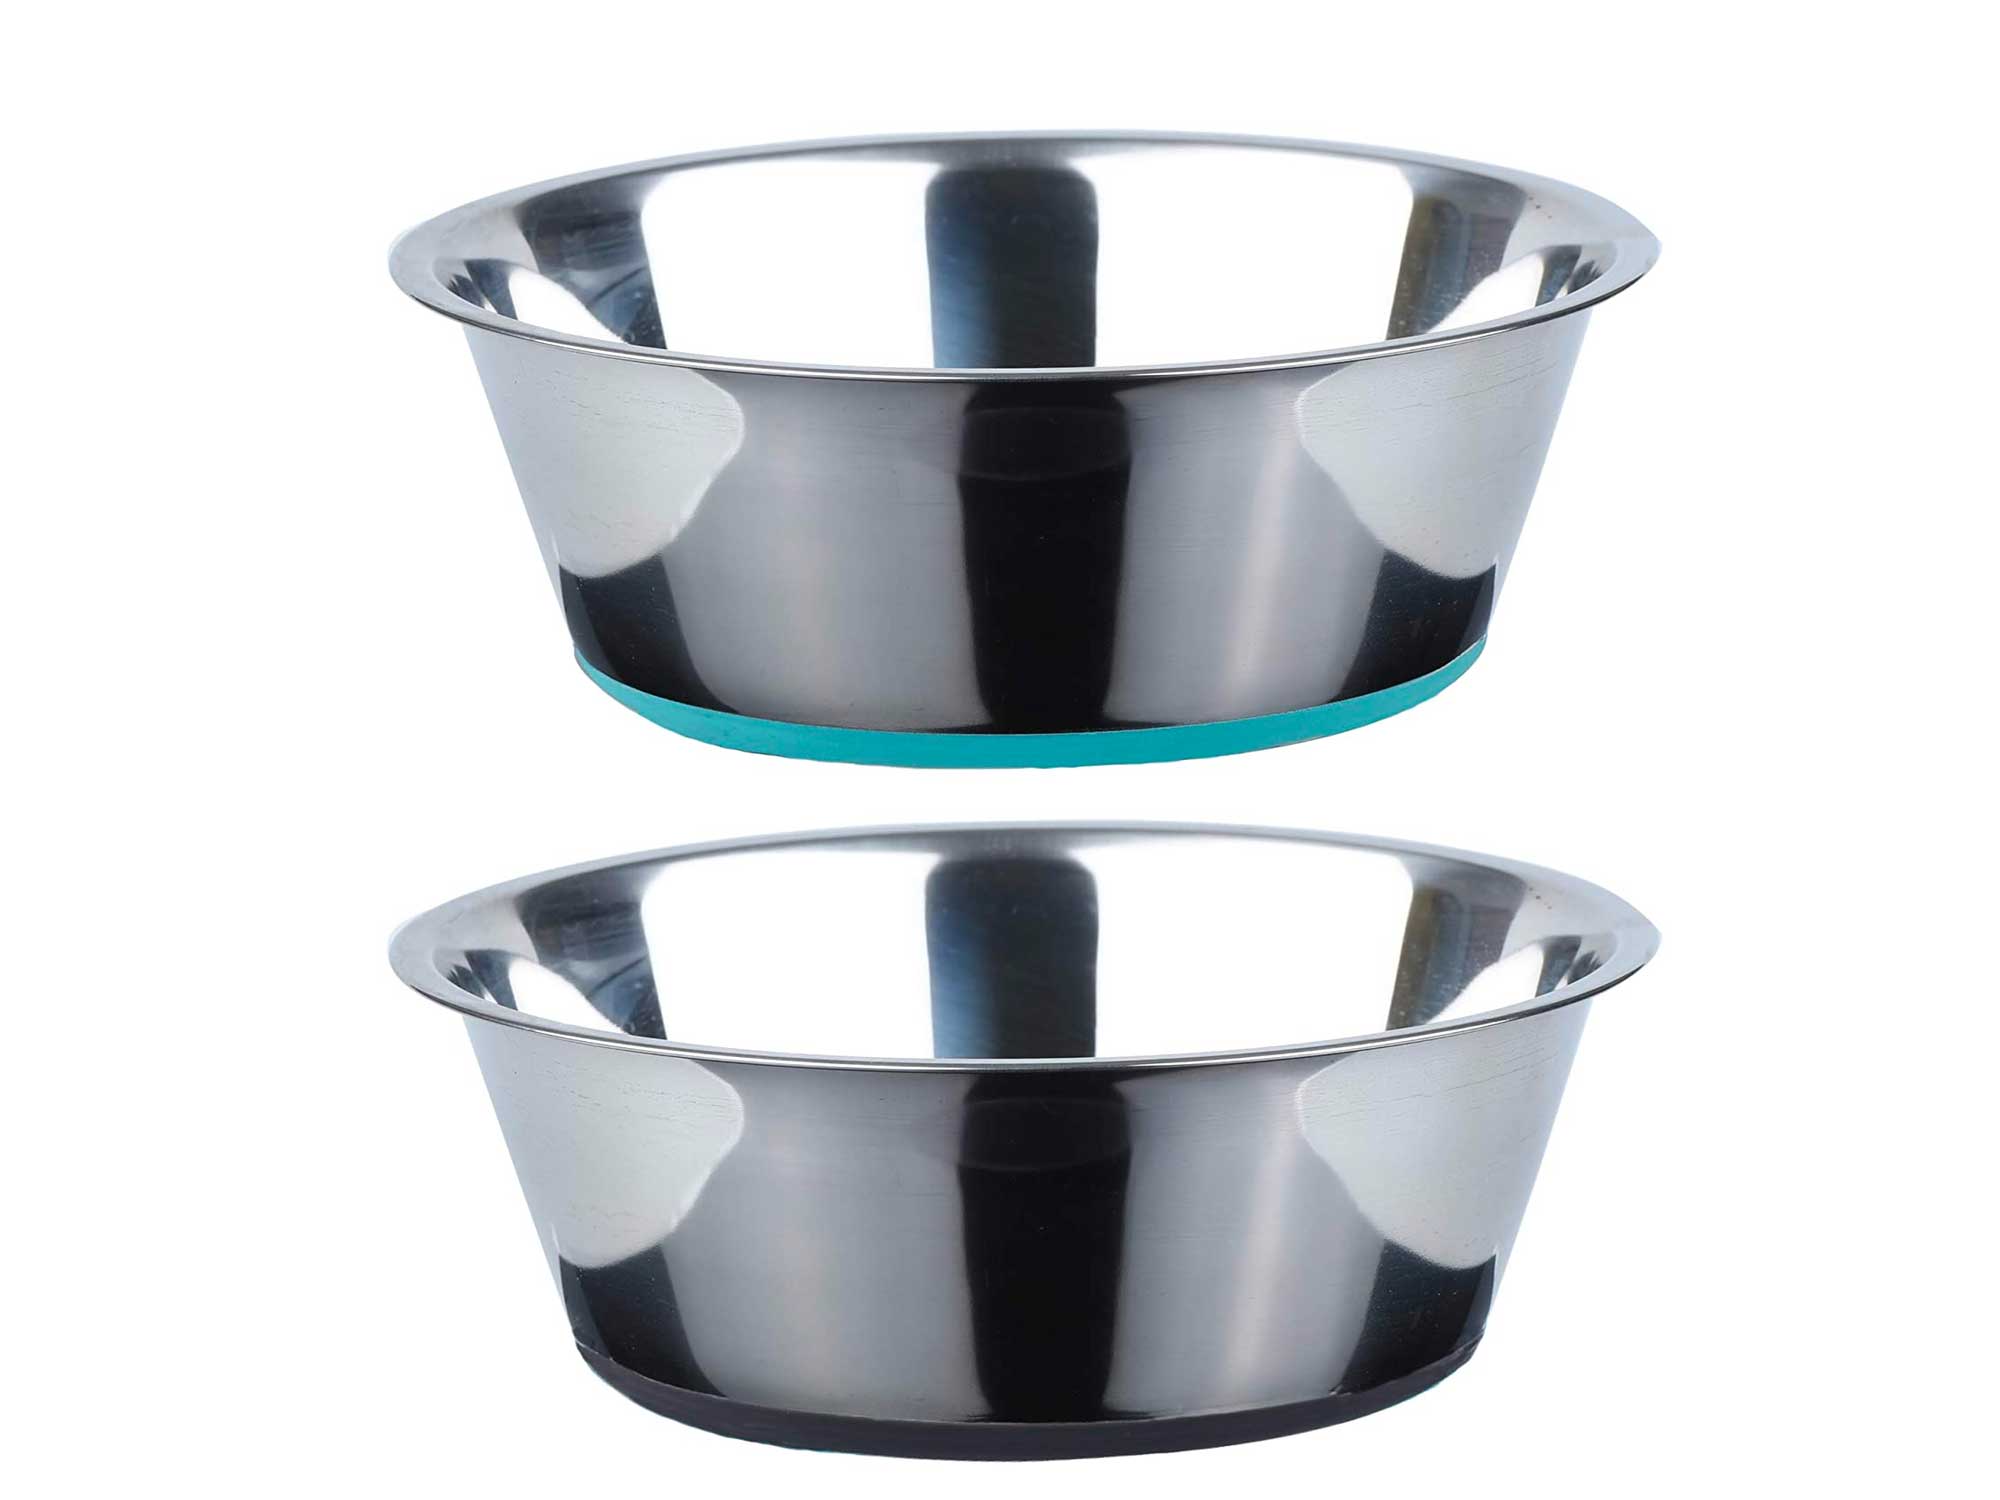 PEGGY11 No Spill Non-Skid Stainless Steel Deep Dog Bowls 26 Oz (3 Cups) Set of 2